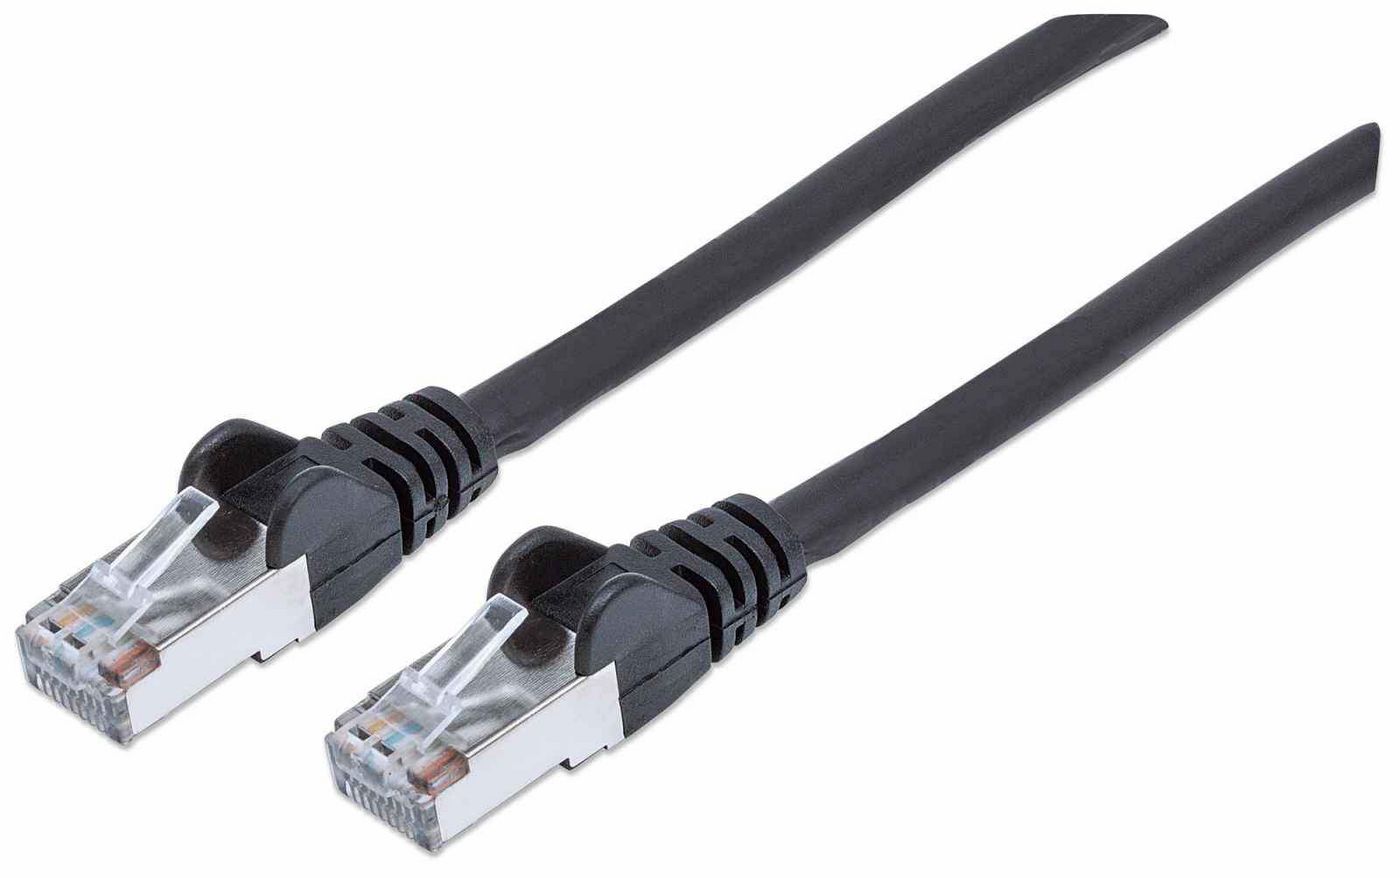 Intellinet 740685 High Performance Network Cable 